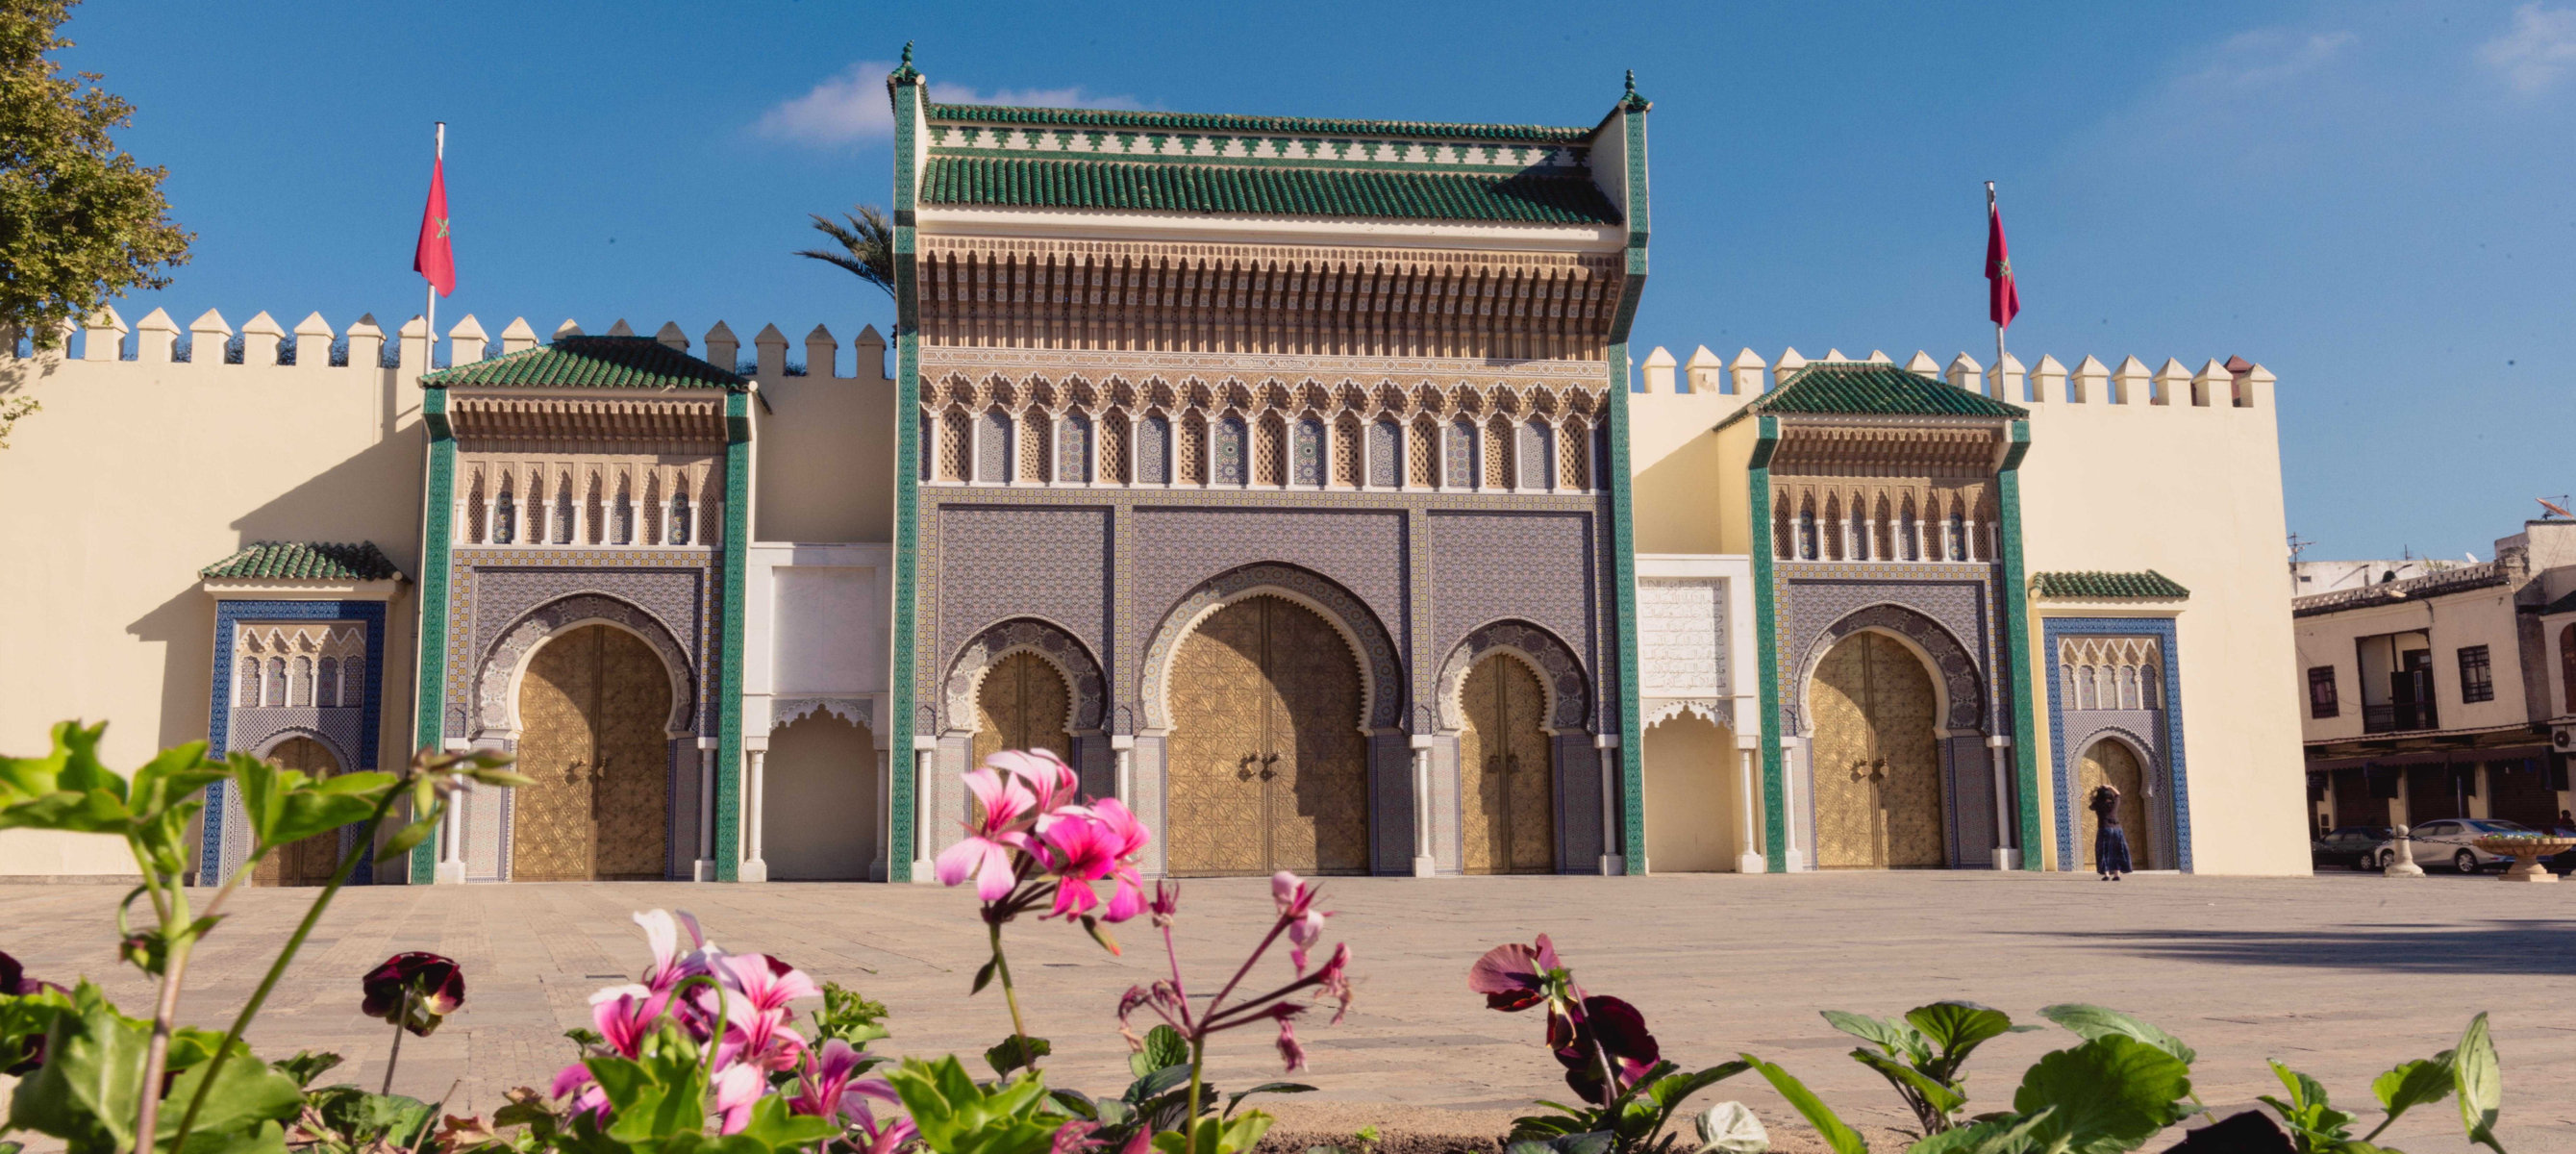 Majesty Tours From Fes